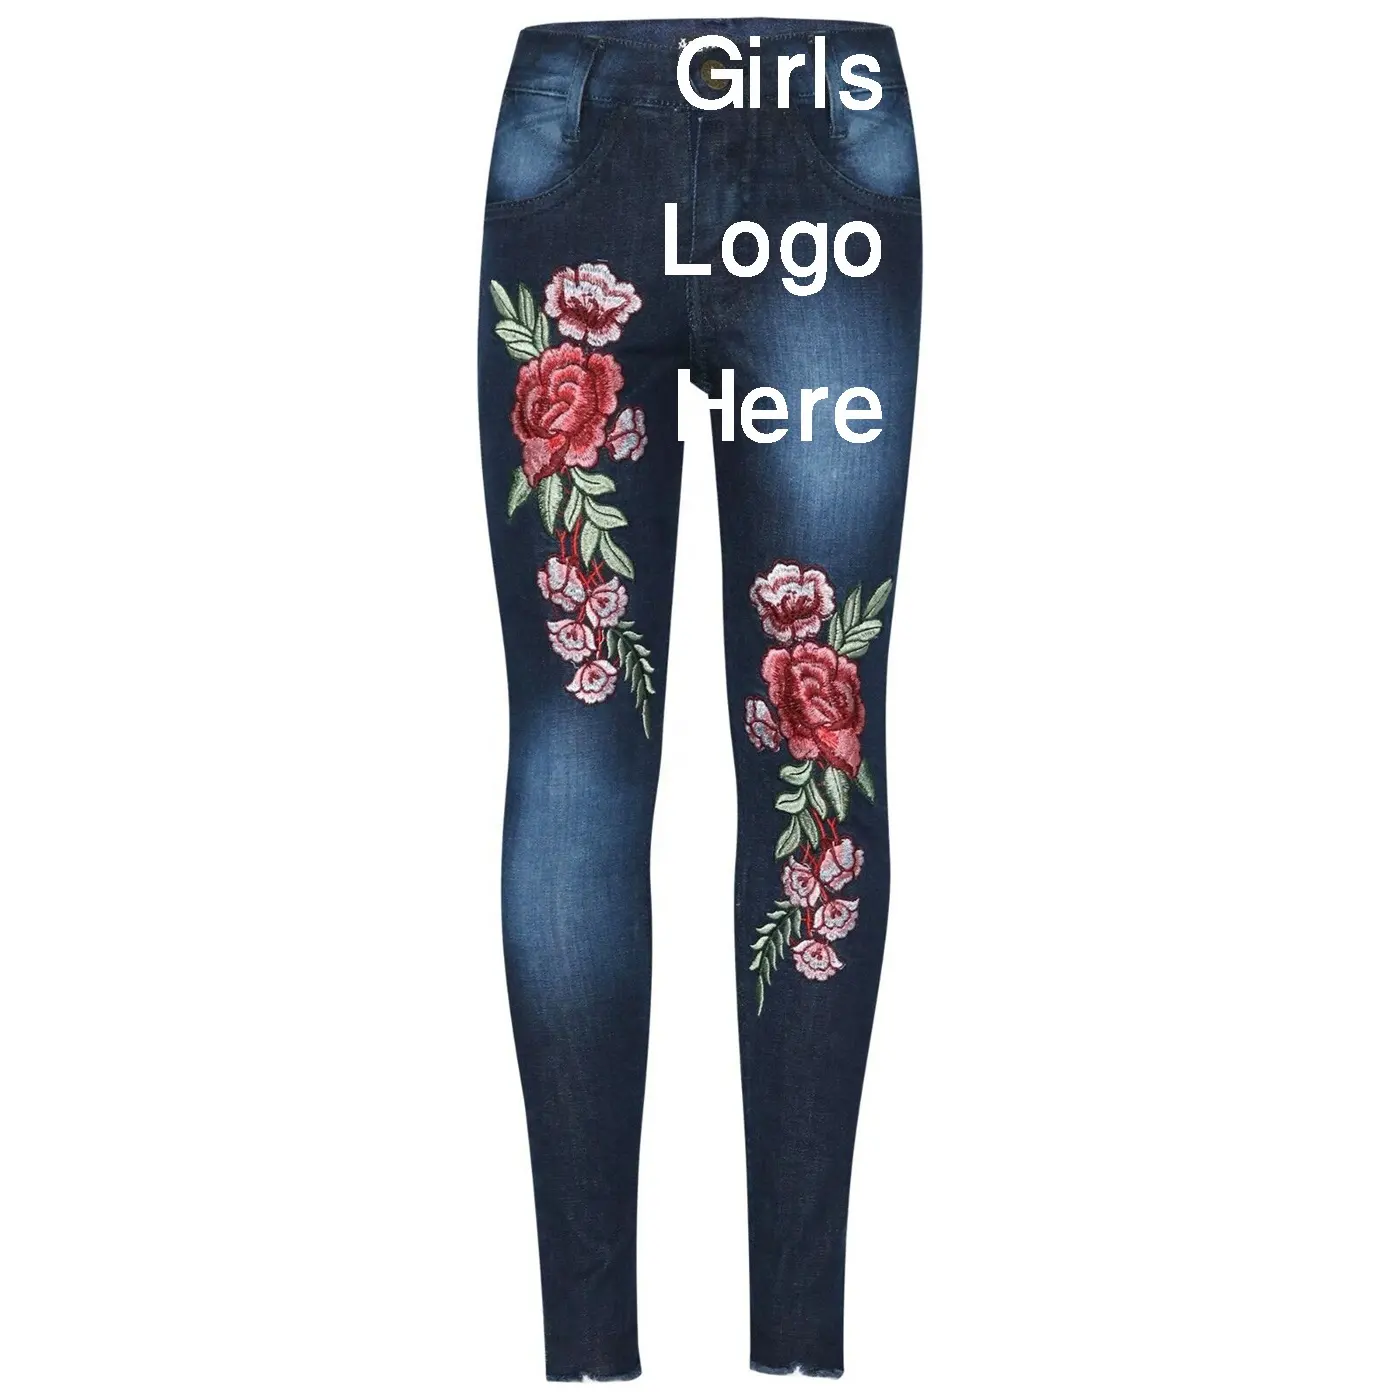 Attractive Looking Smartness Exported Oriented Best Quality girls jeans best fashionable Direct Supplier item from Bangladesh